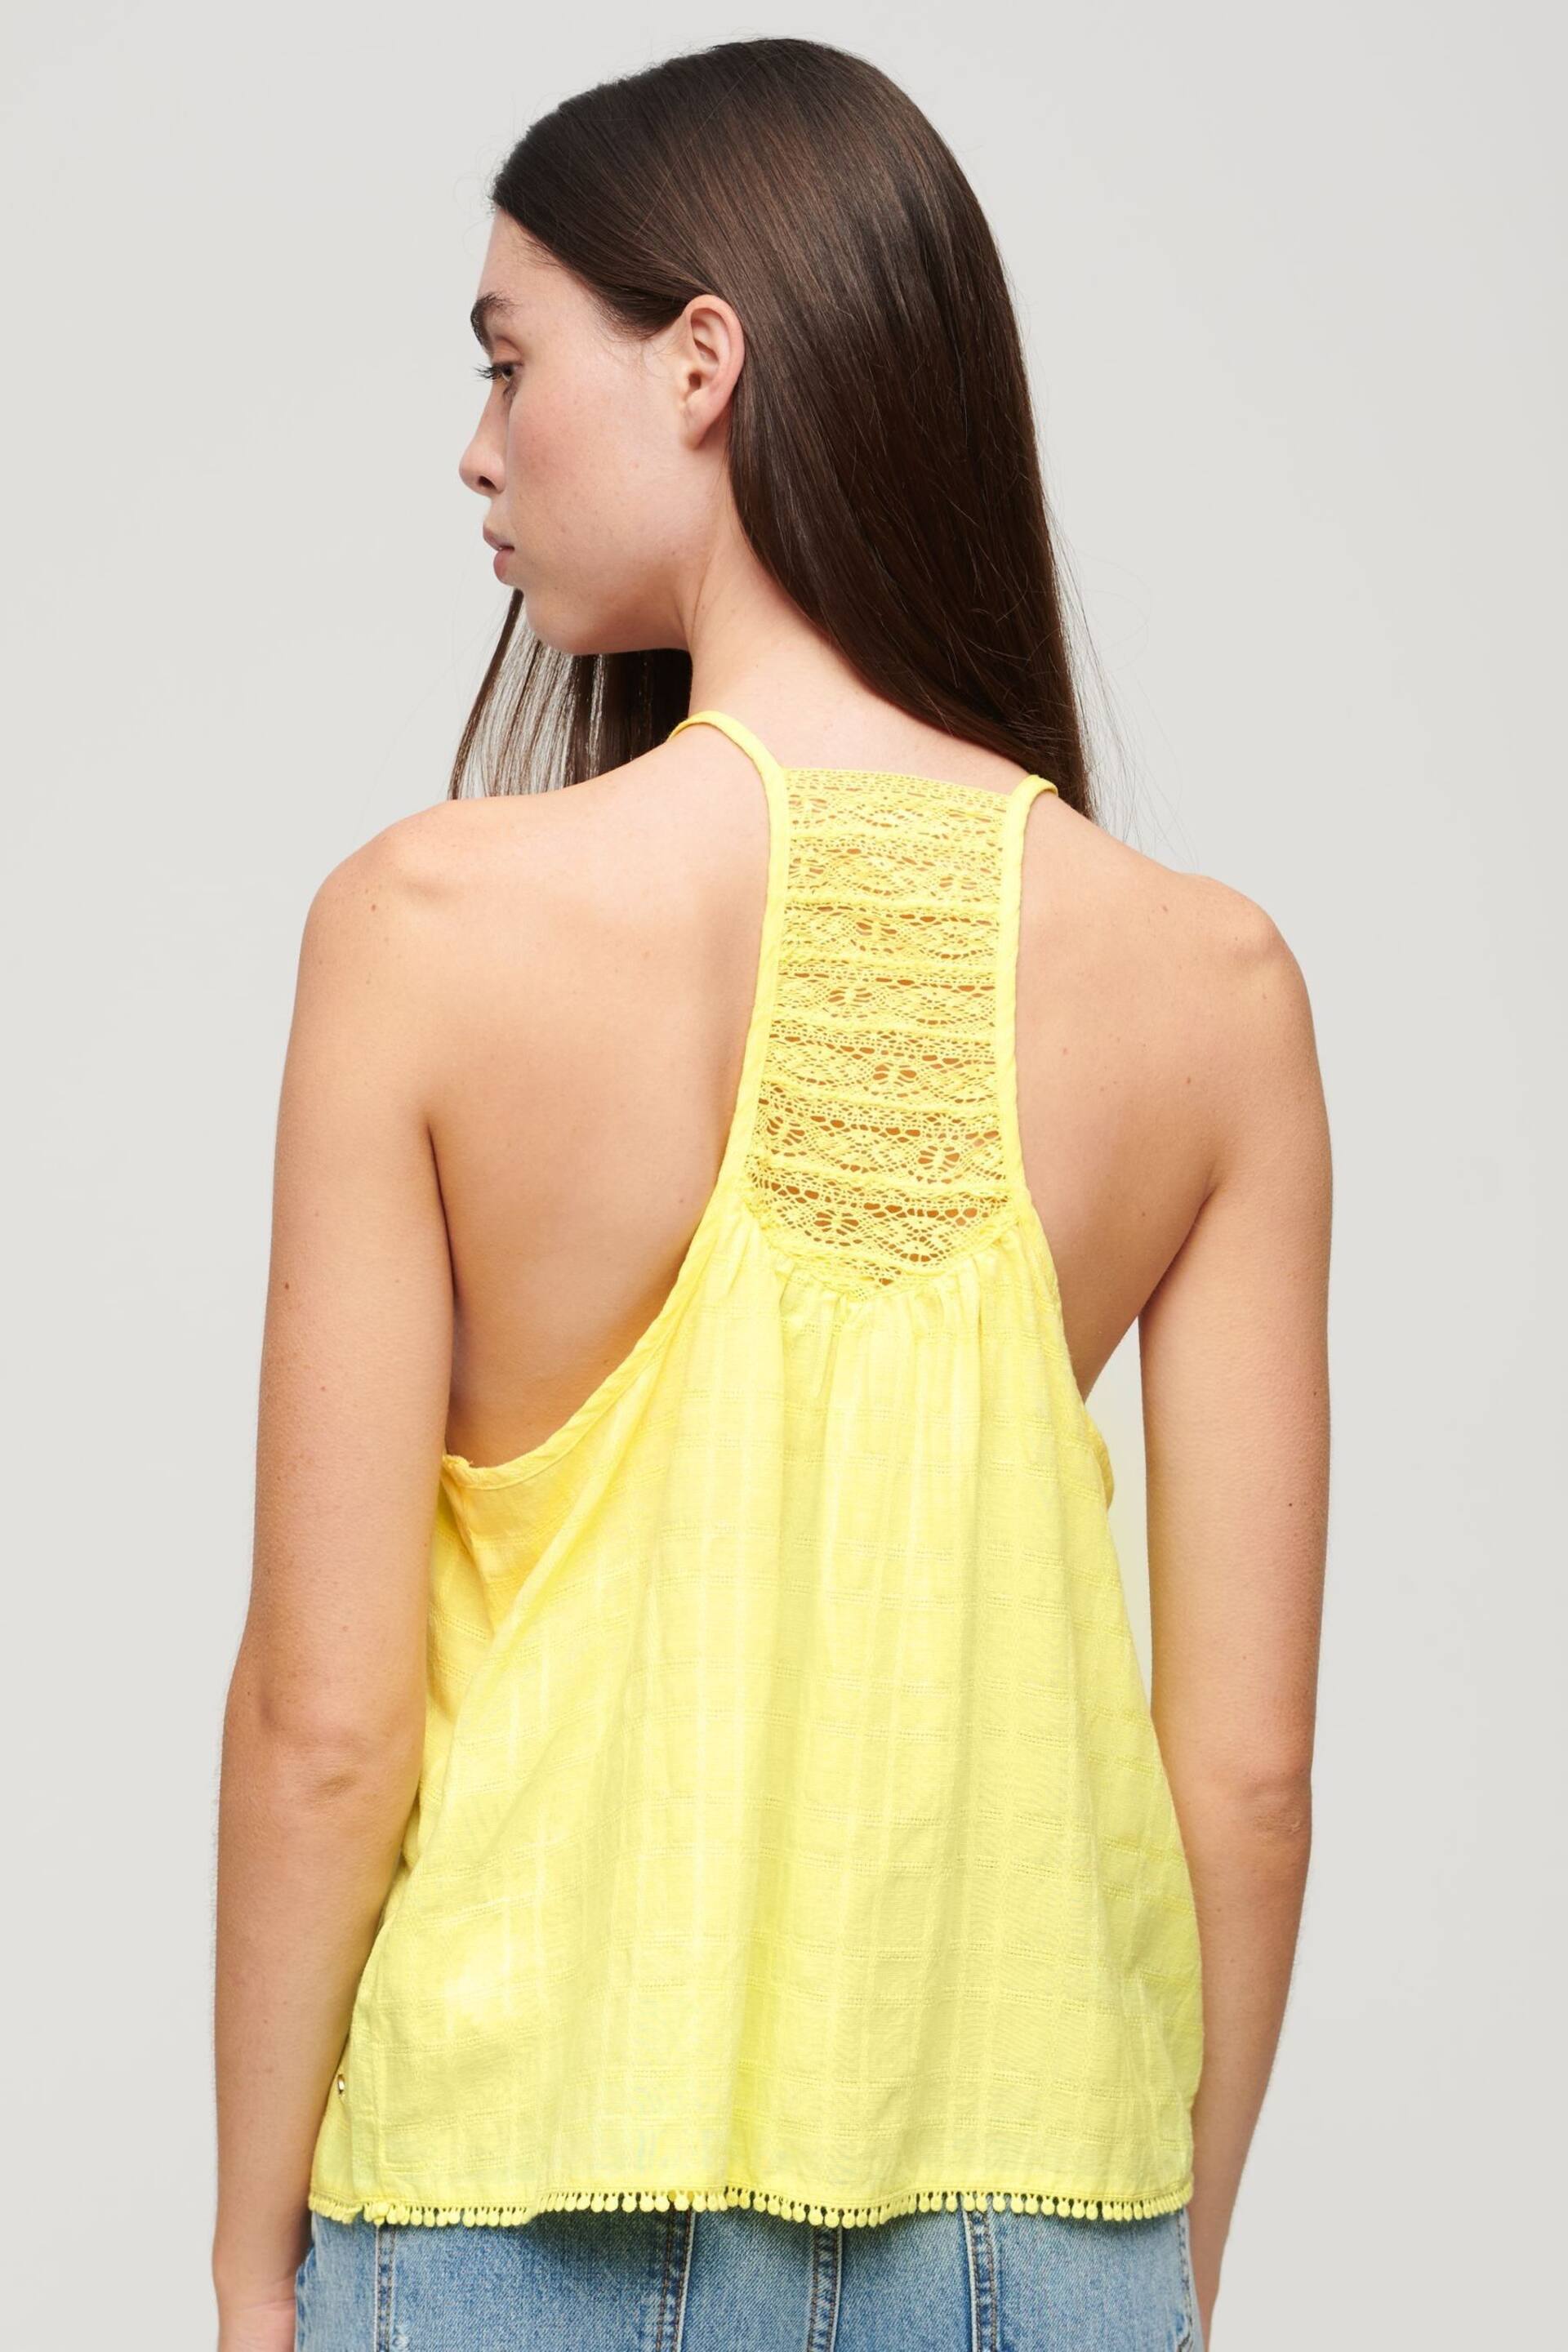 Superdry Yellow Lace Cami Beach Top - Image 3 of 3